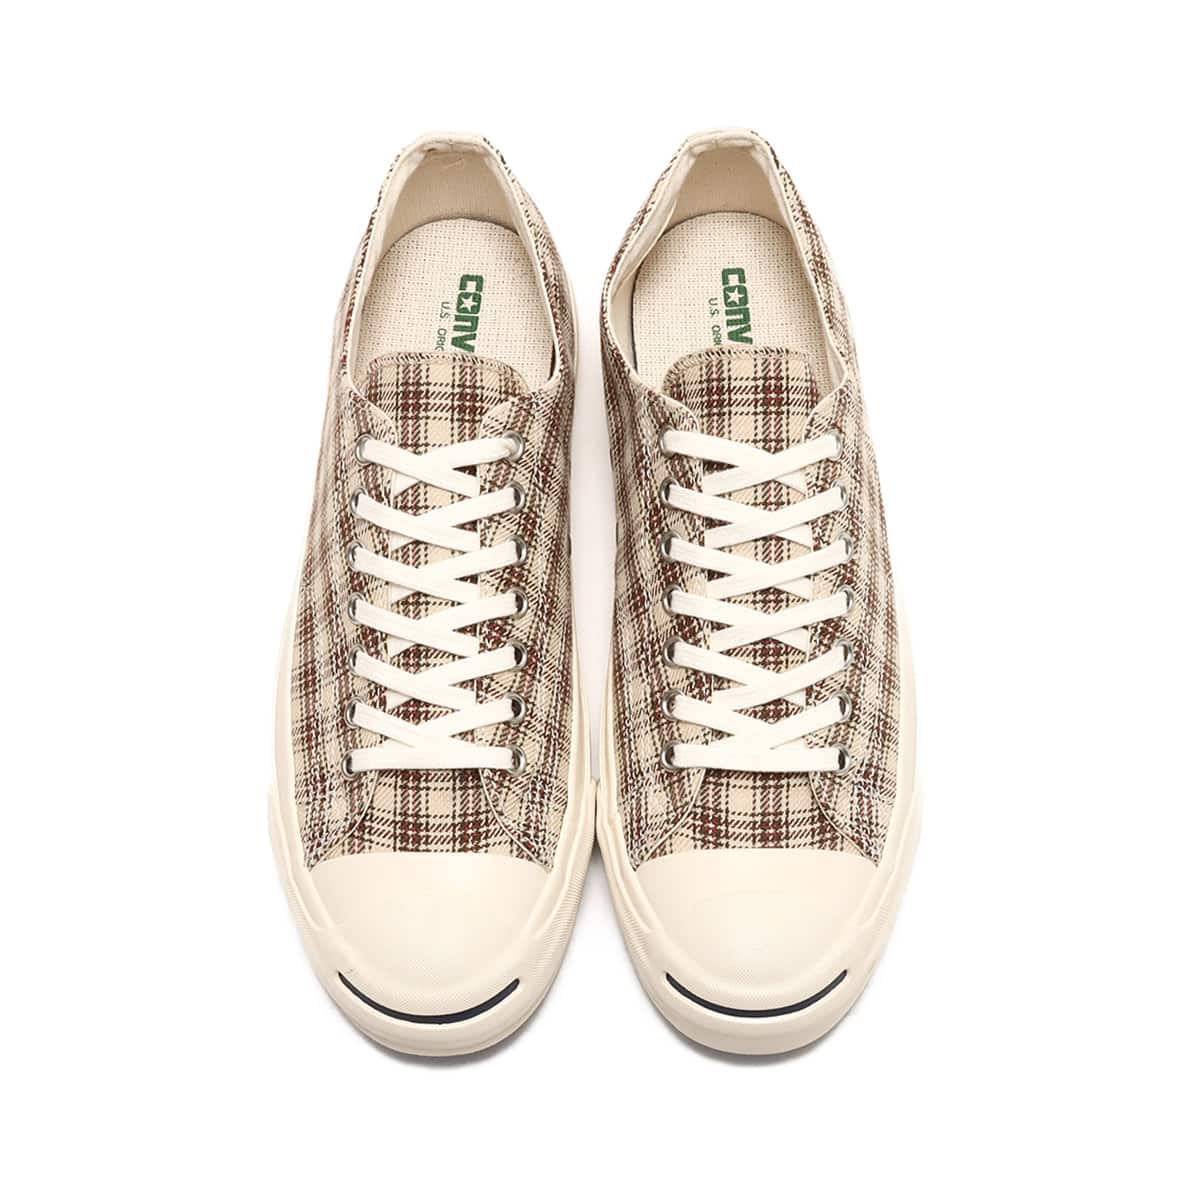 CONVERSE JACK PURCELL US CHECK BEIGE